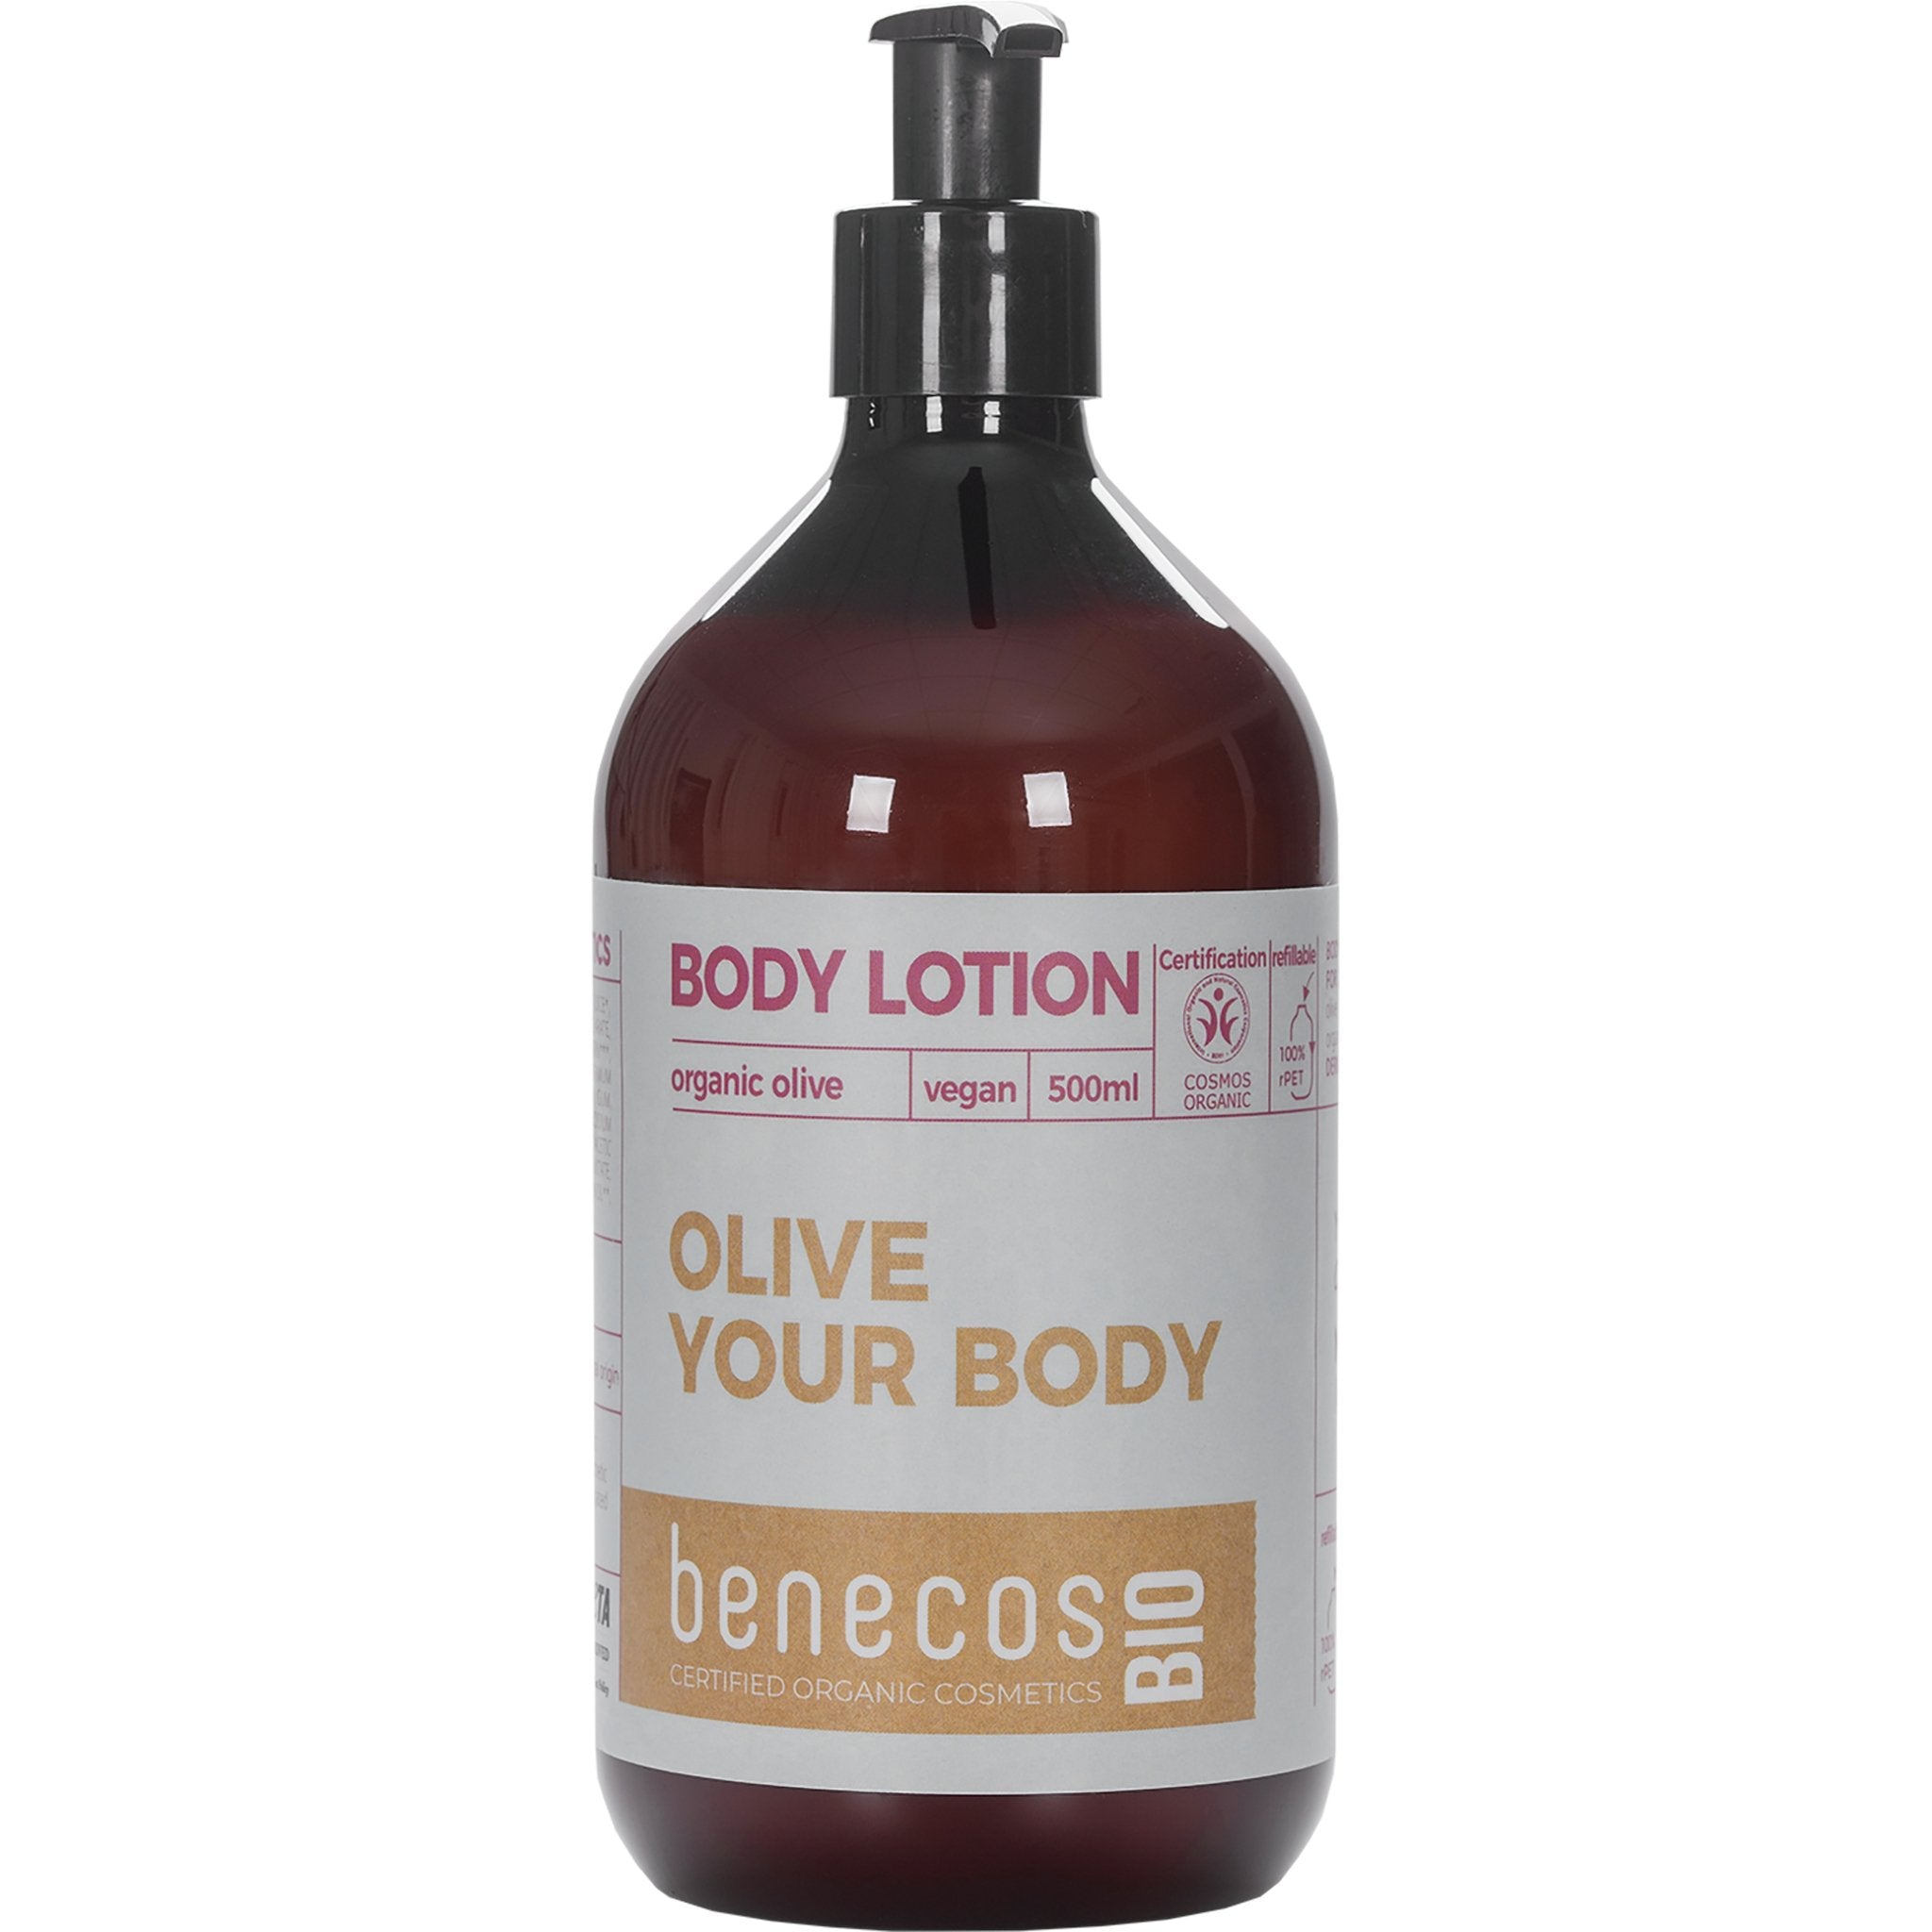 NEW Olive Your Body - Body Lotion - mypure.co.uk